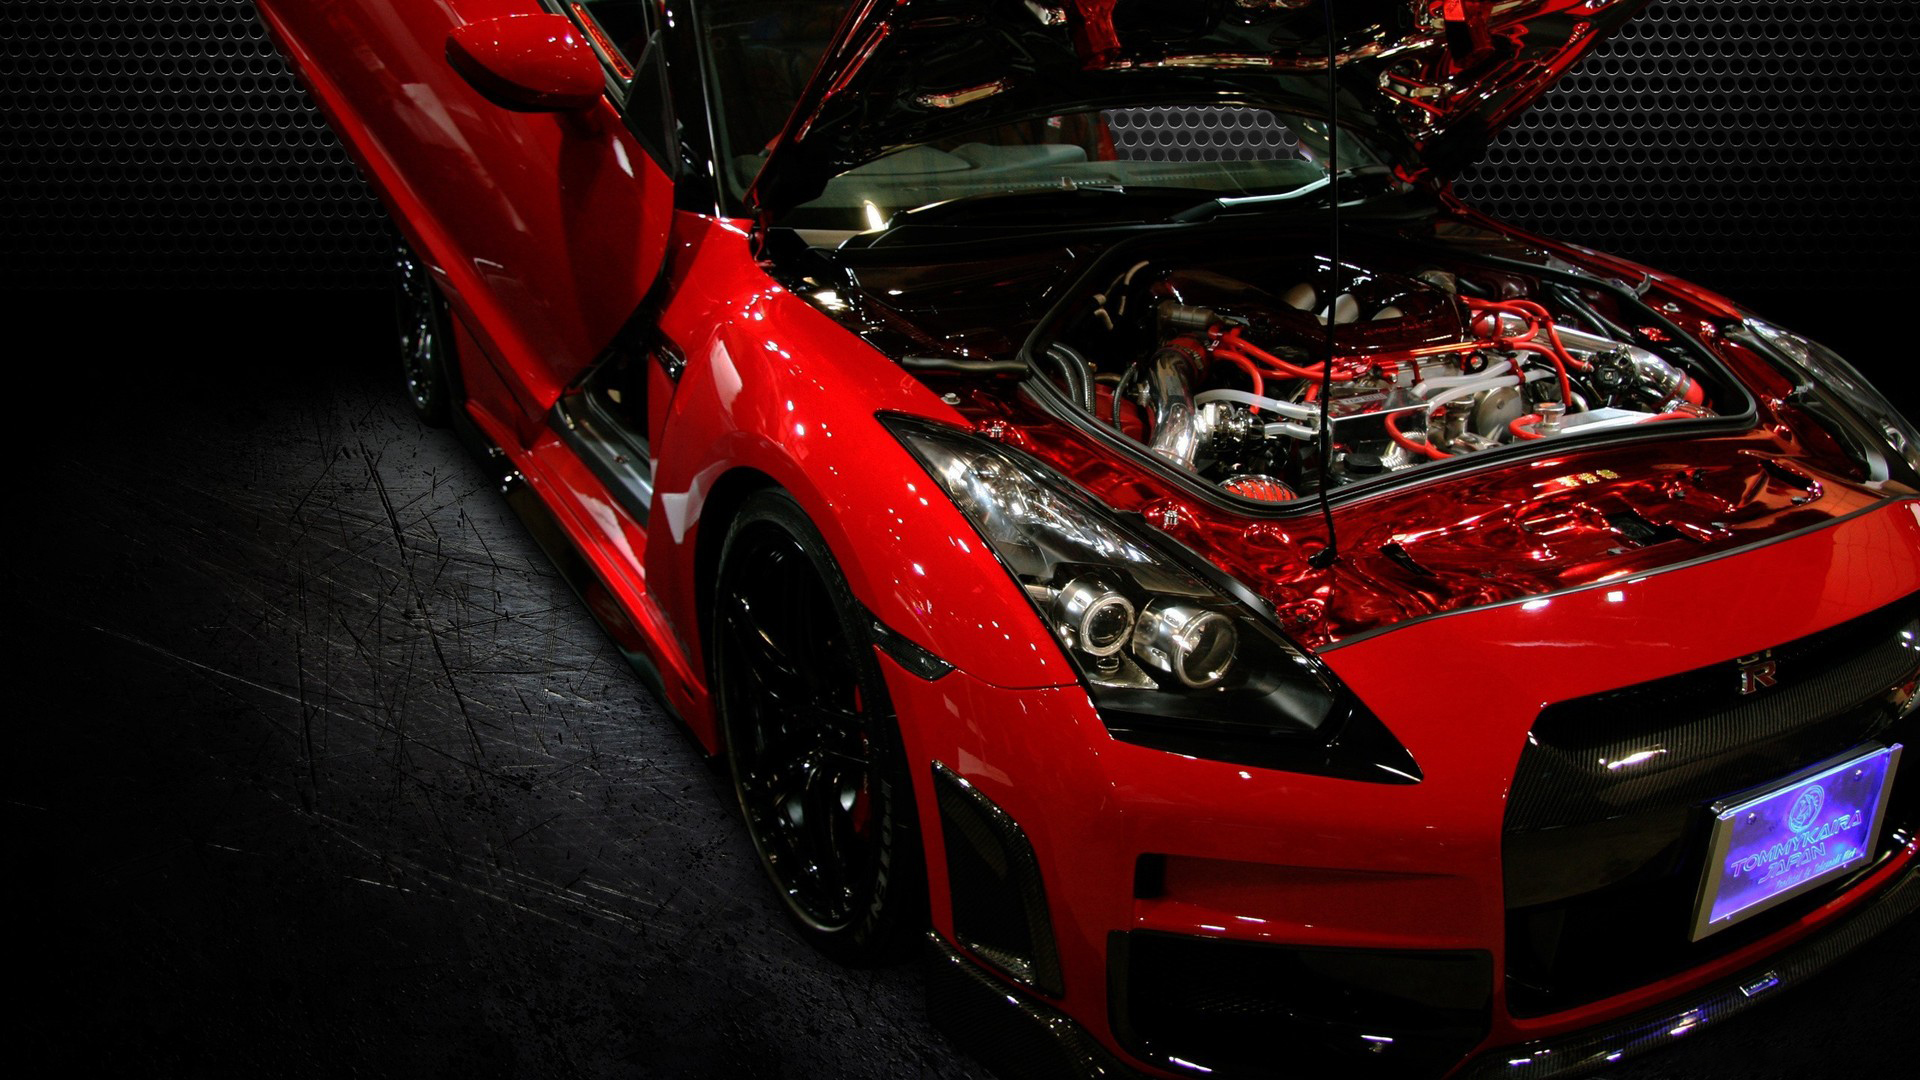 Nissan GTR Nissan Car Vehicle Red Cars Engines 1920x1080